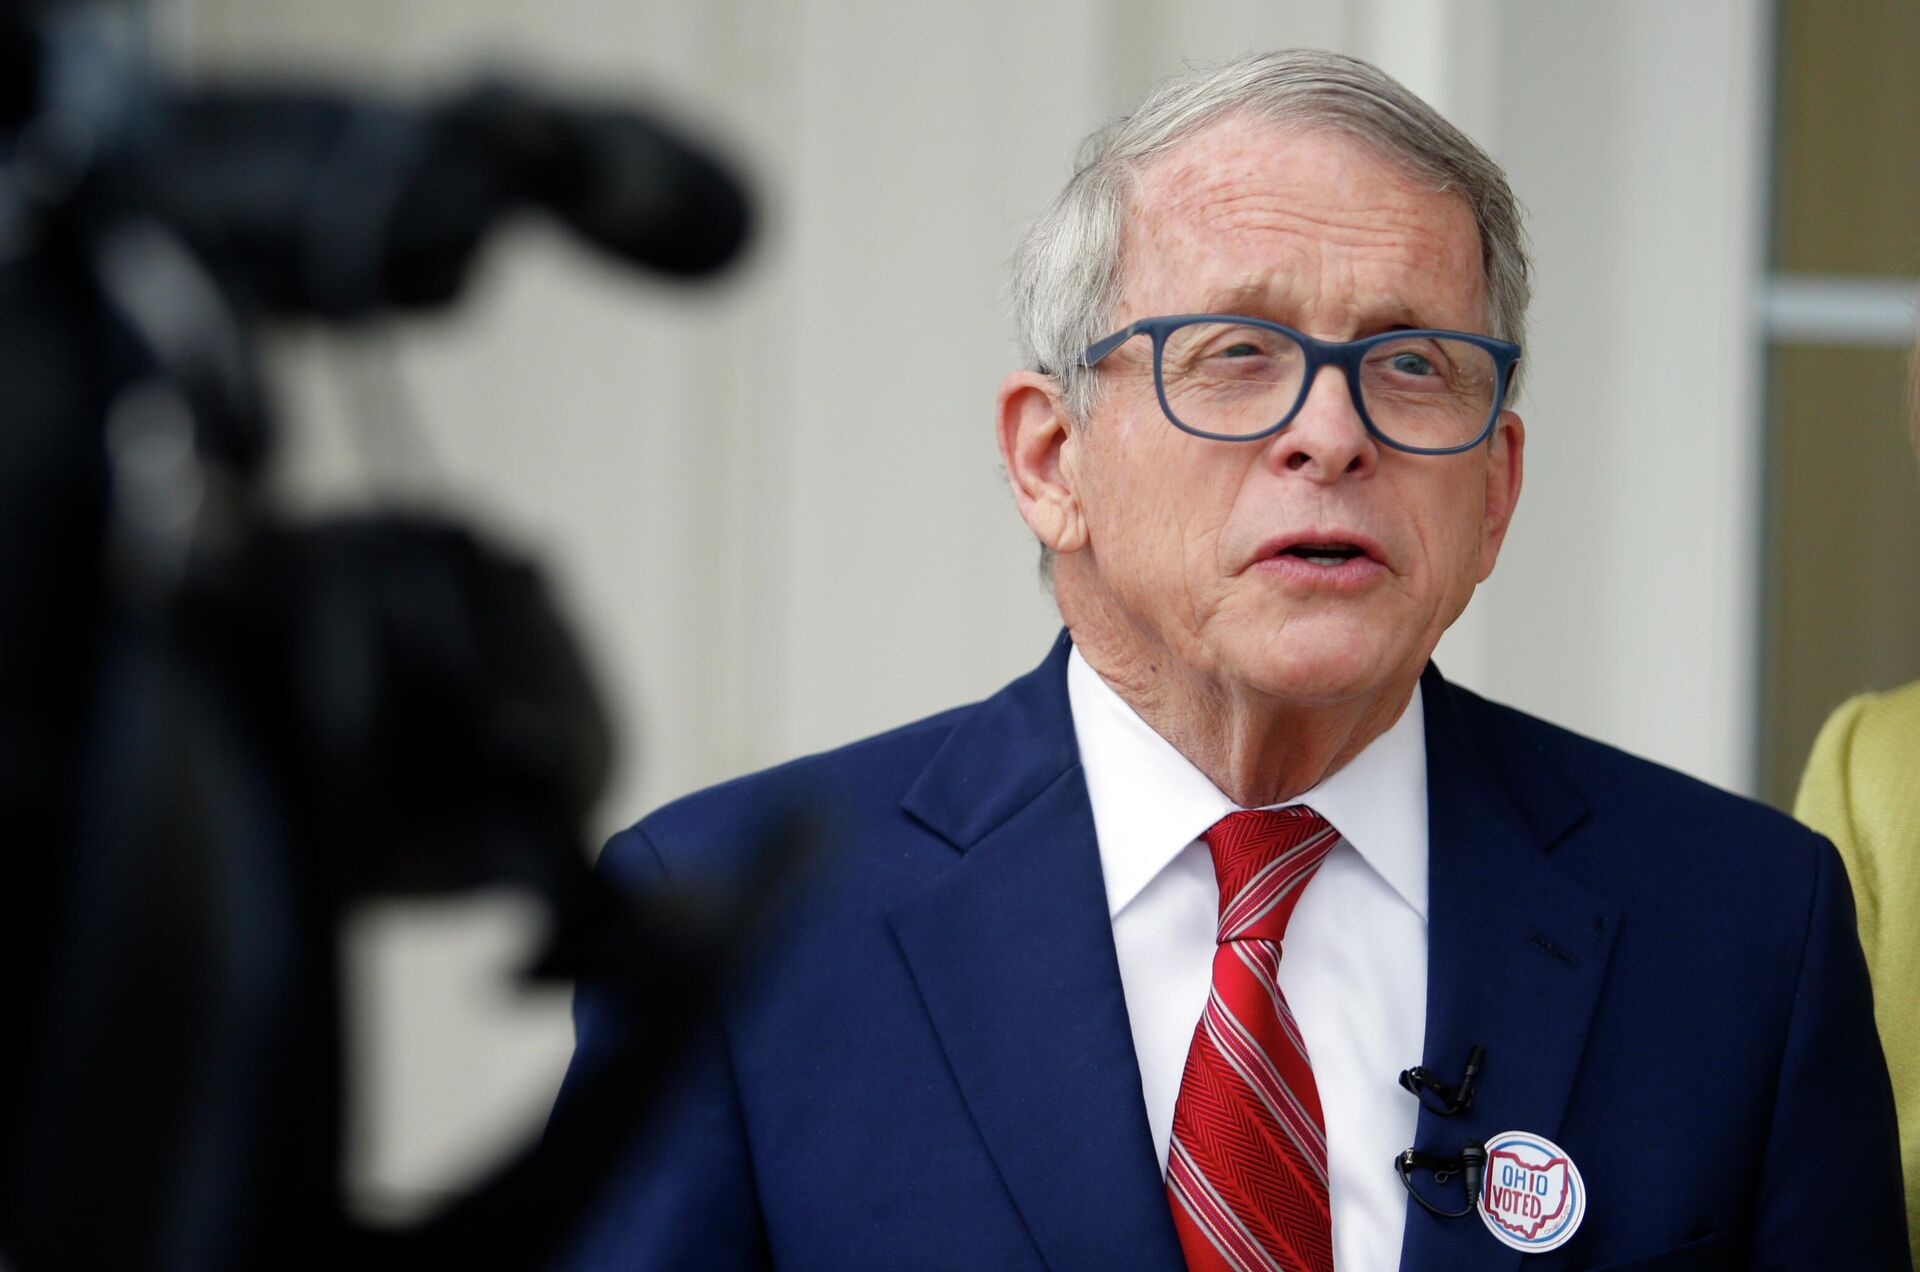 Ohio Gov. Mike DeWine talks with reporters outside of his polling place after voting in Cedarville, Ohio, Tuesday, May 3, 2022. - Sputnik International, 1920, 04.05.2022